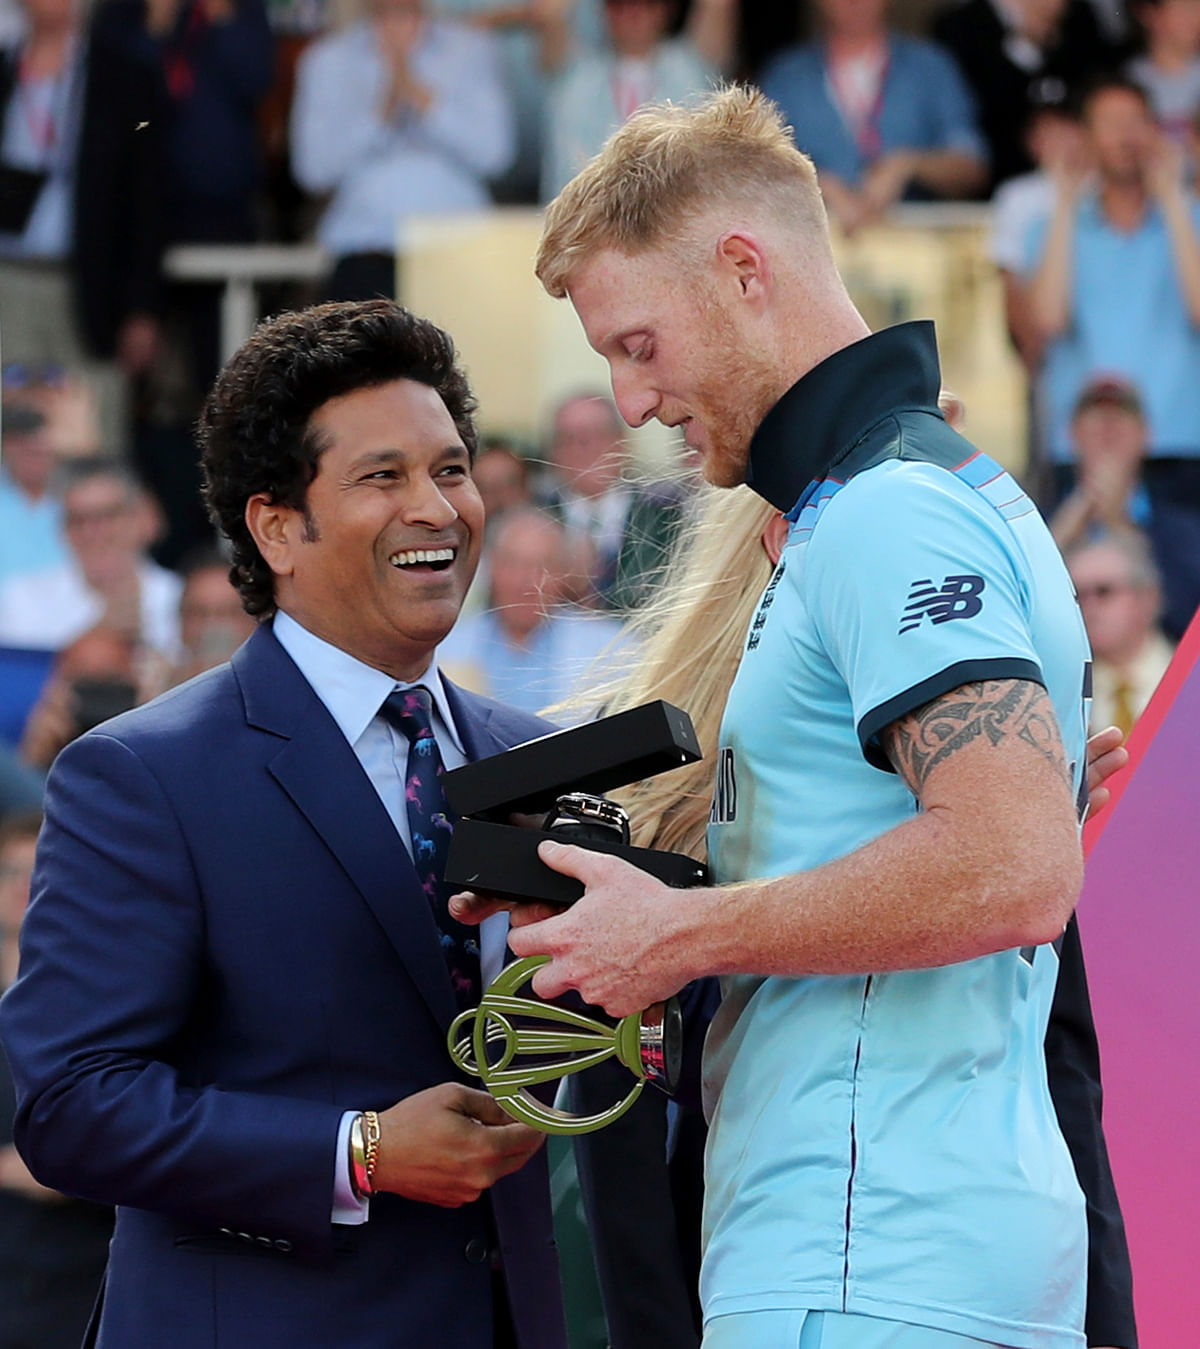 “I said to Kane Williamson, ‘I’ll be apologising for that for the rest of my life,’” said Stokes.